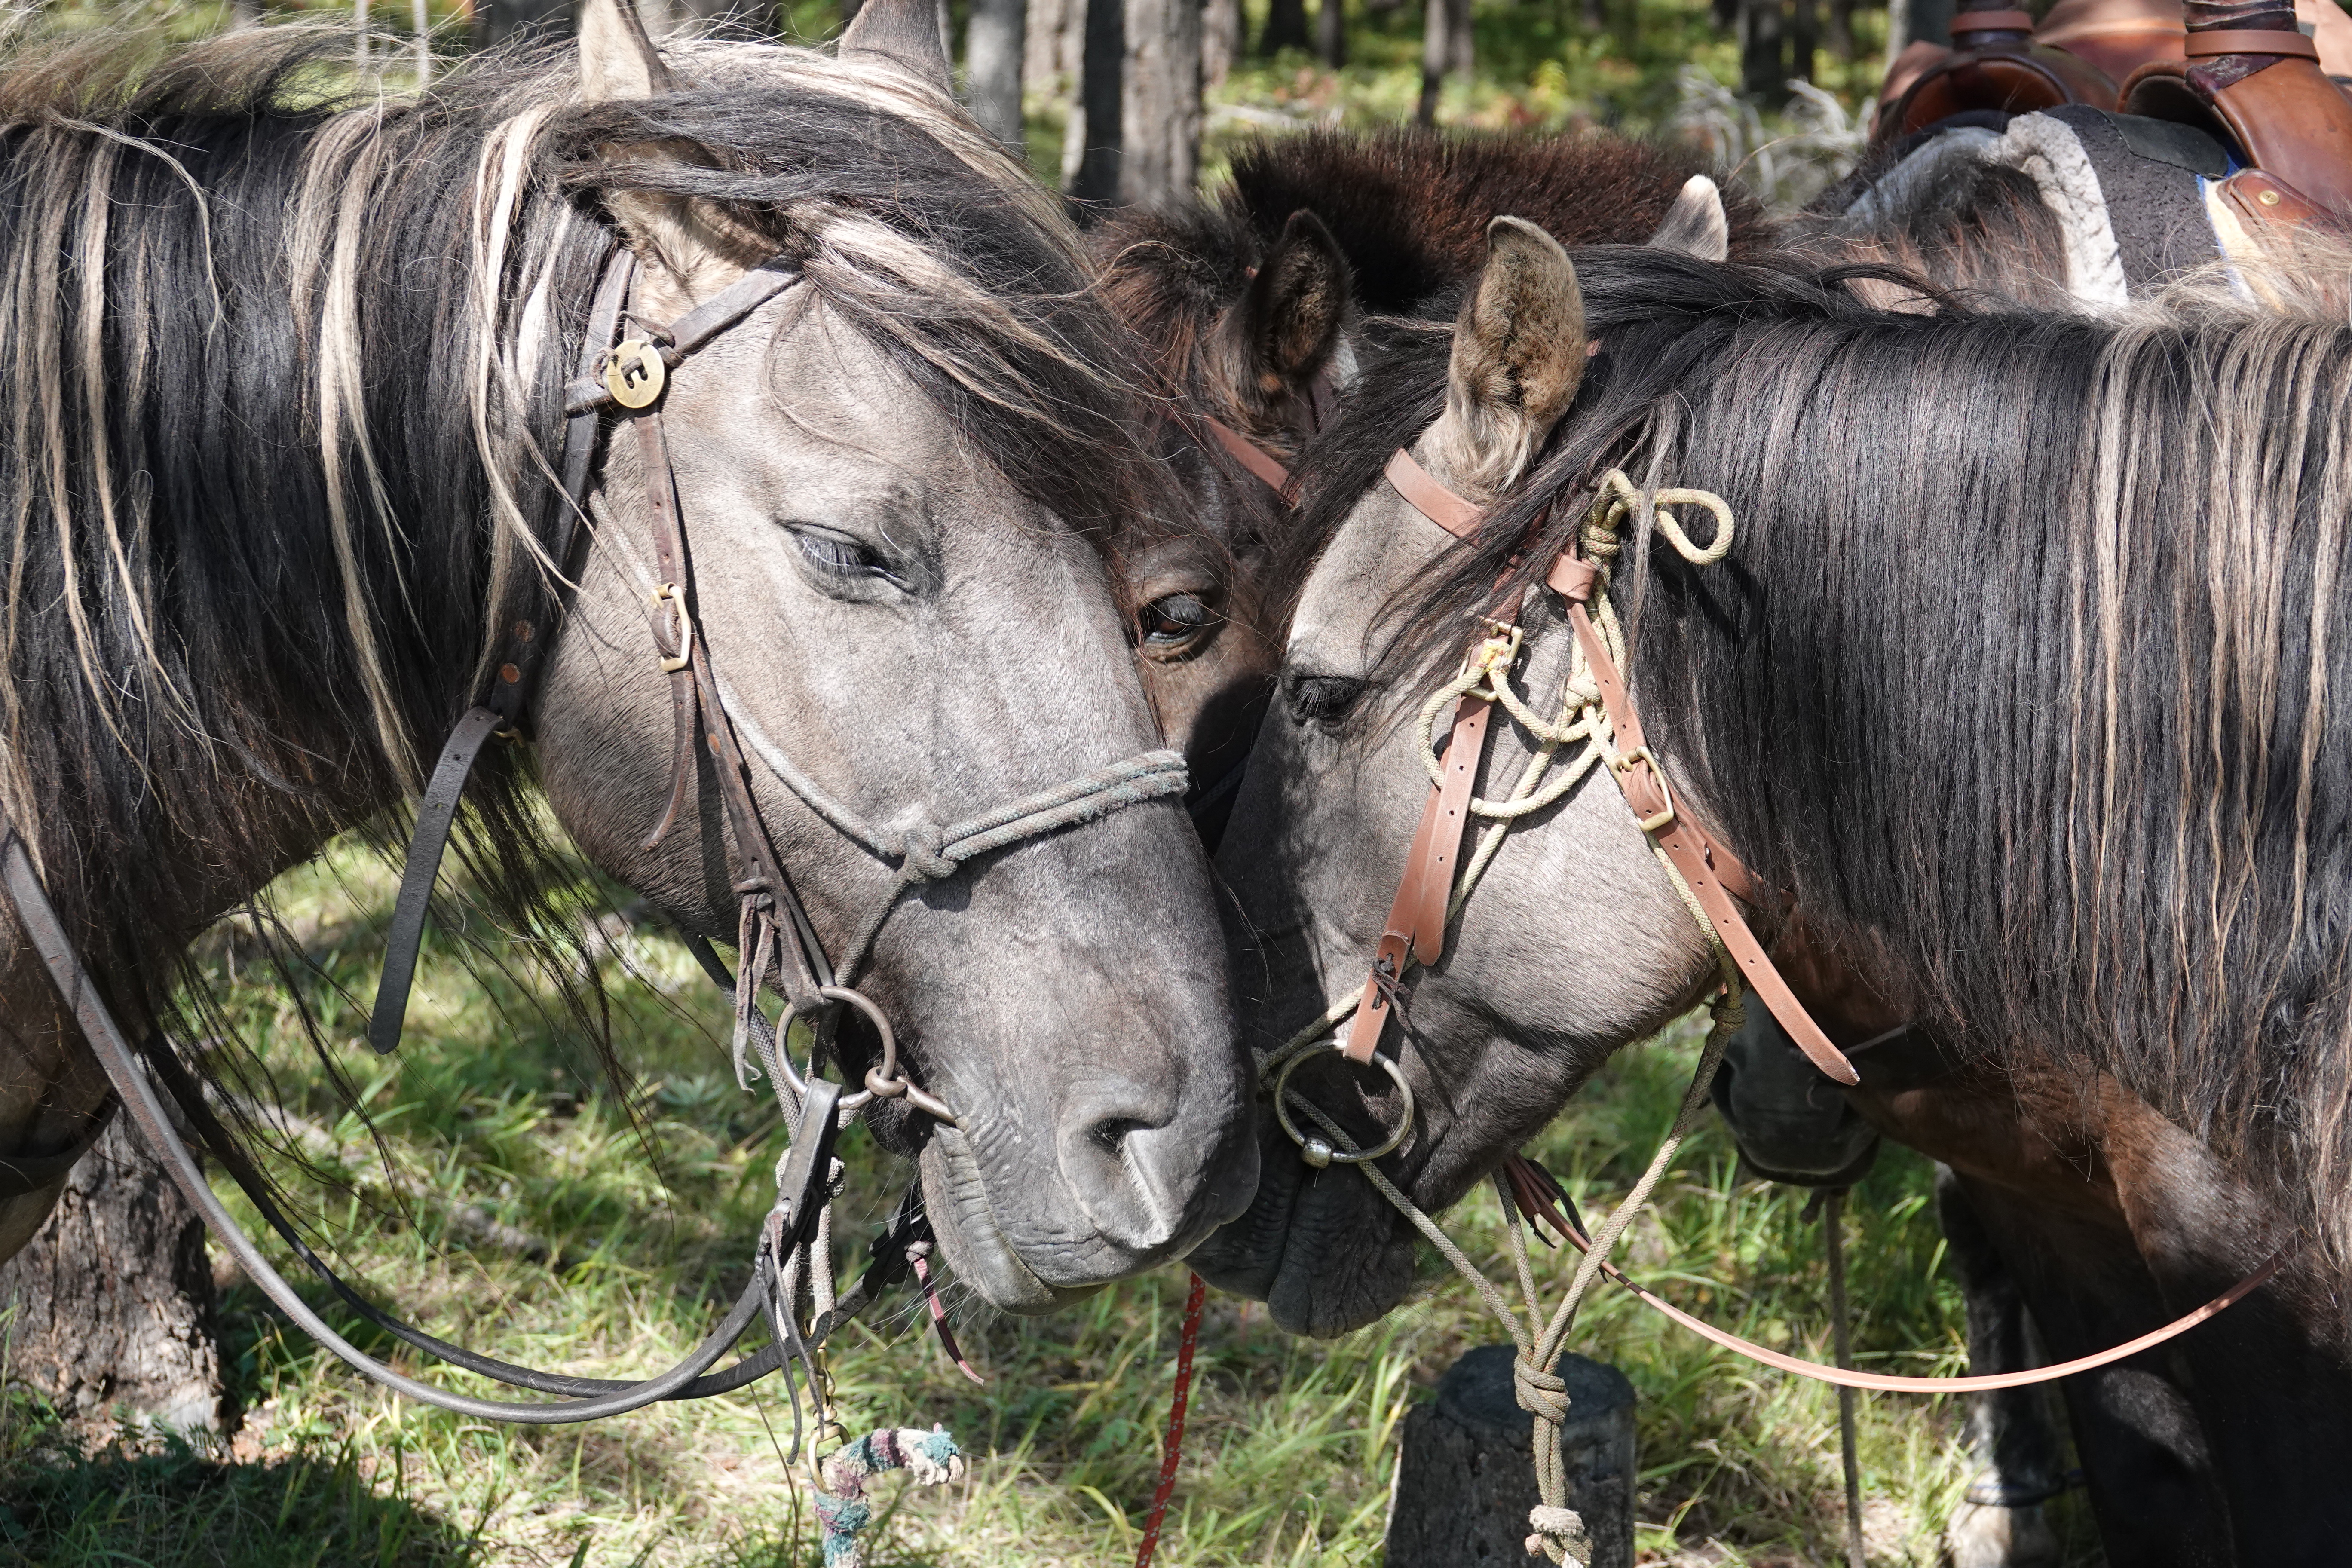 Mongolian horses, trail horses for Stone Horse Expeditions, our two grey horses